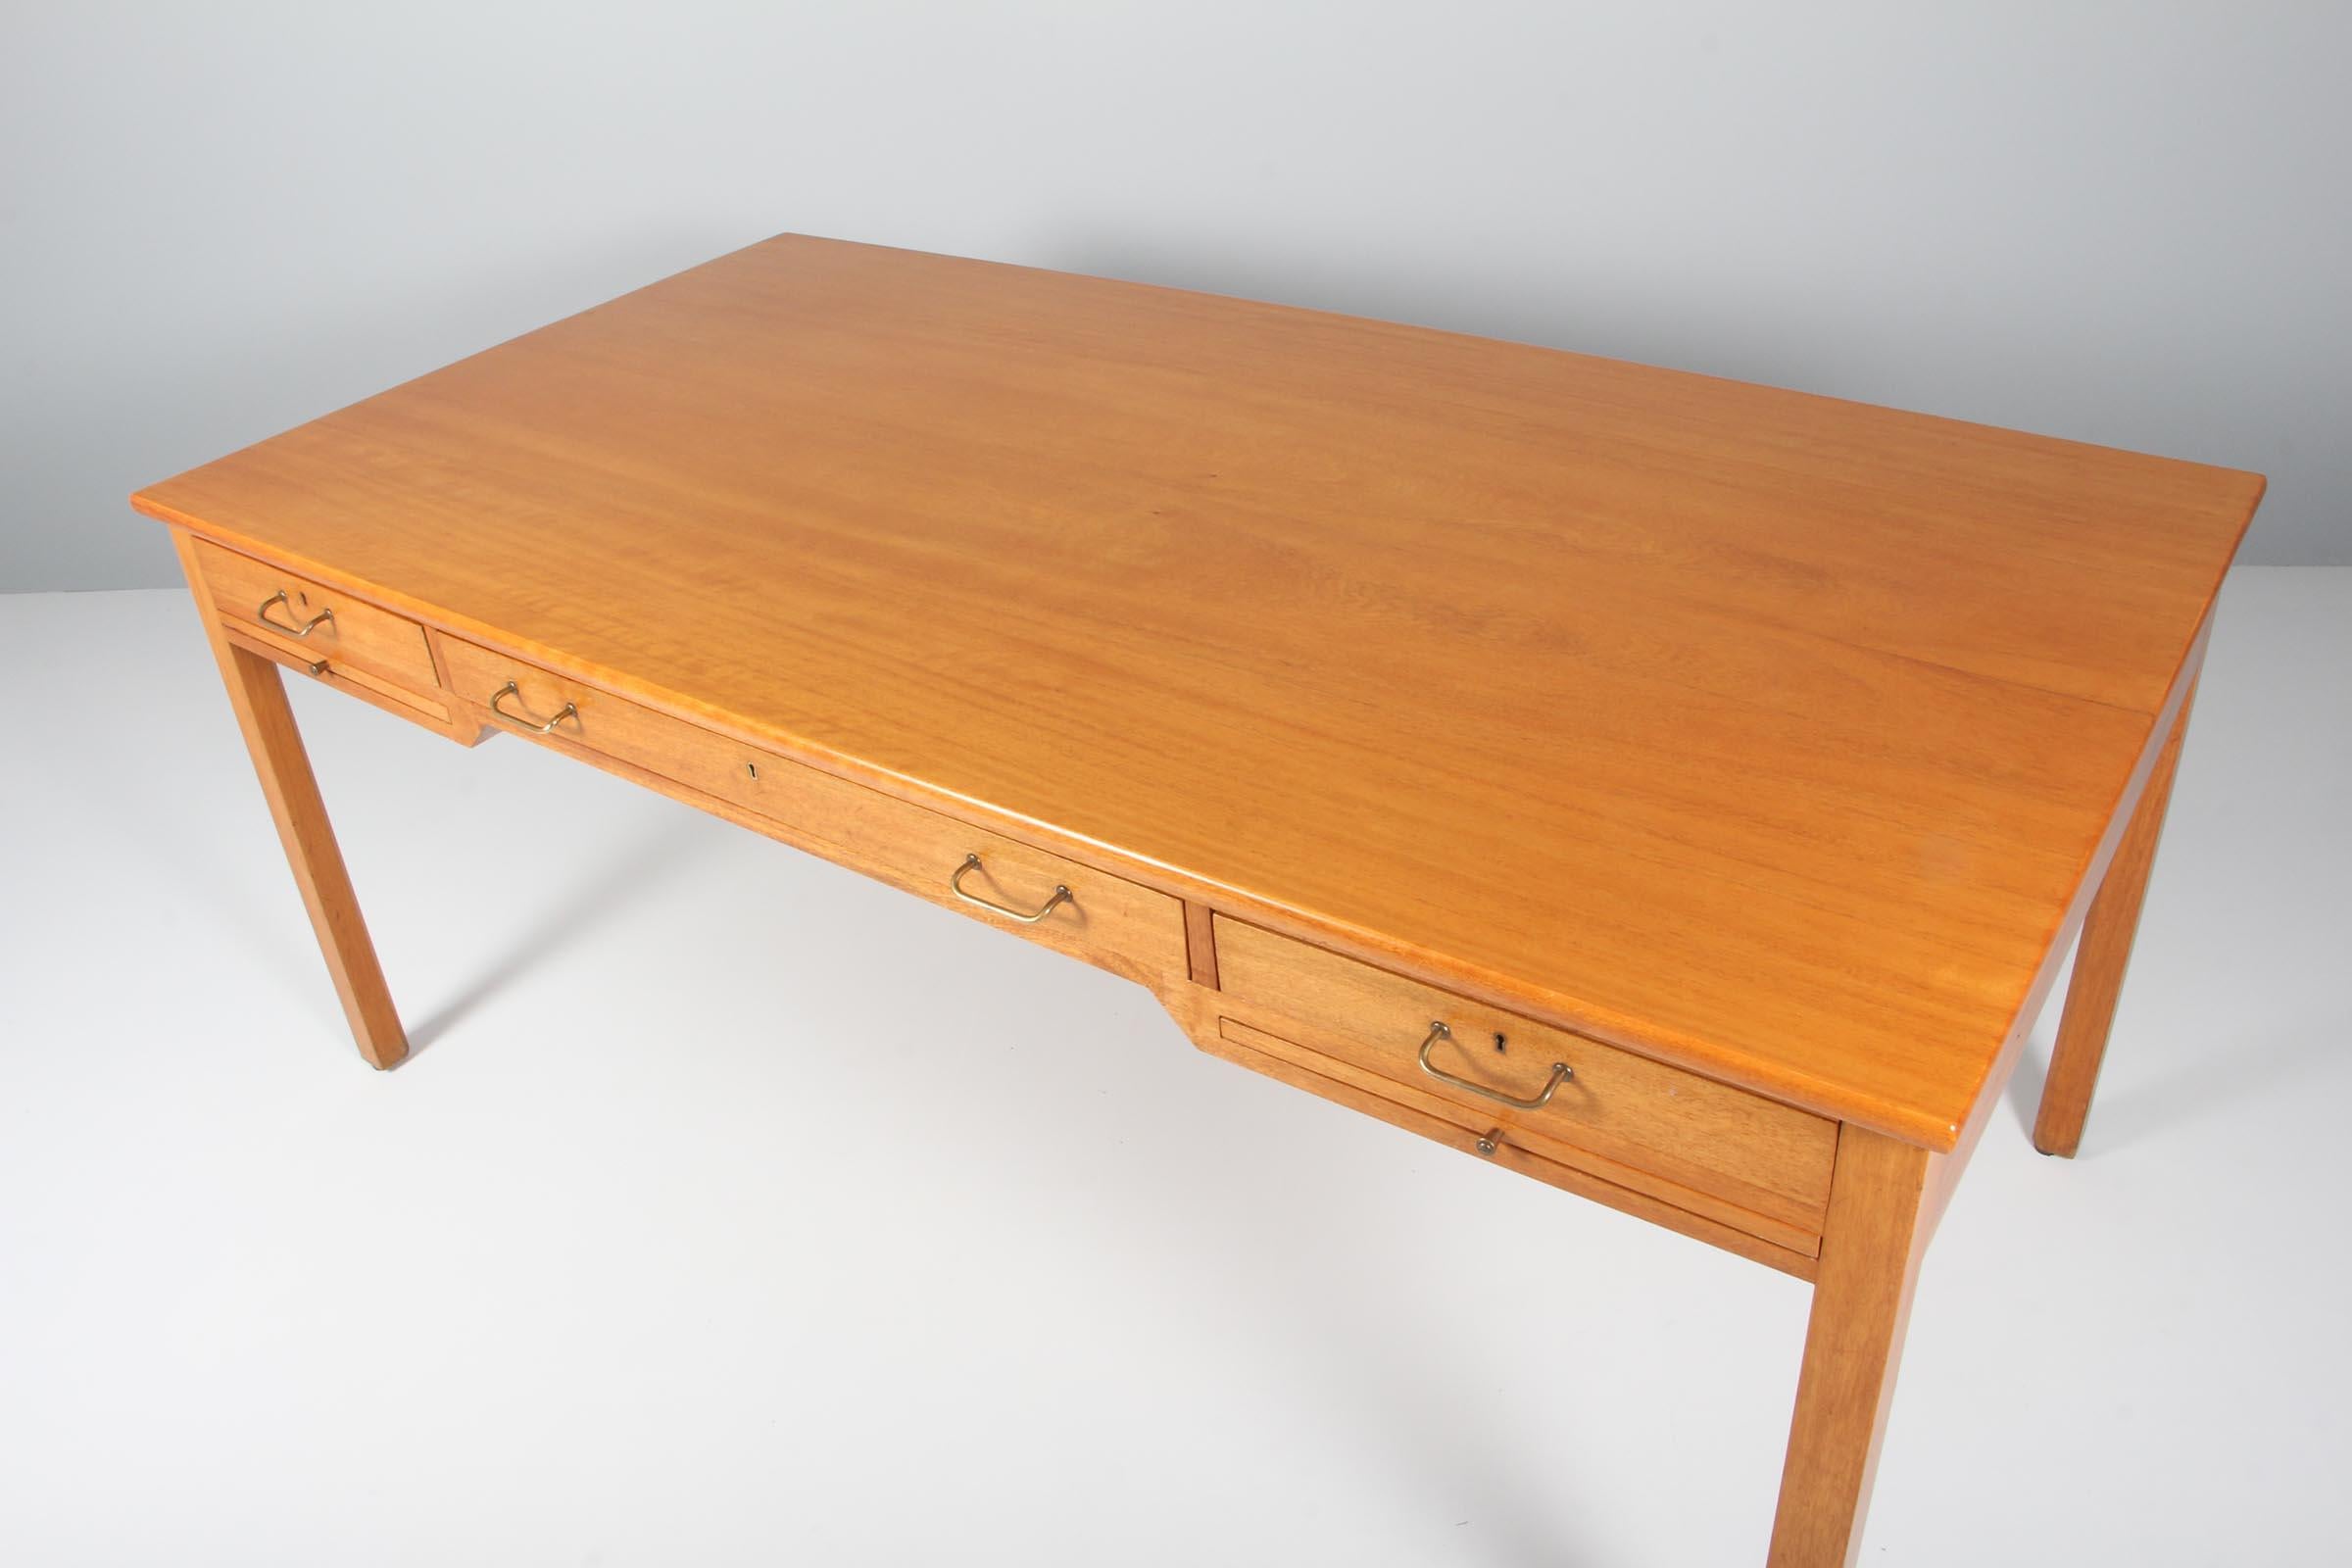 Kaare Klint desk made of solid cuban mahogany. 

Drawers and writing trays with brass details.

Made and marked by Rud Rasmussen.